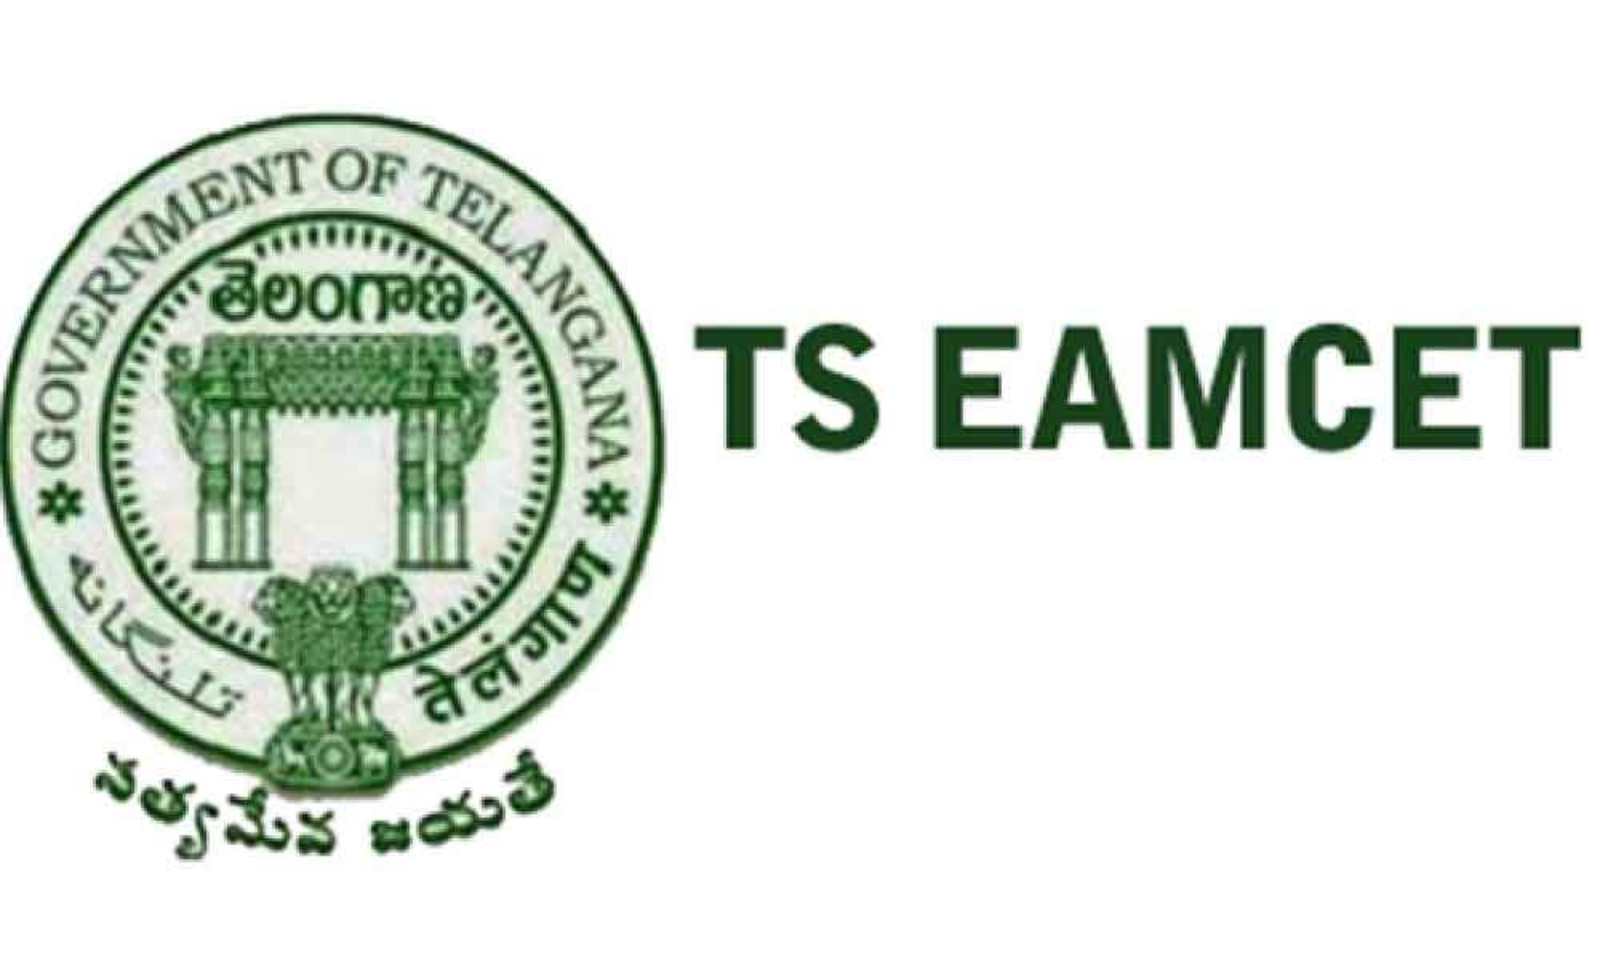 TS EAMCET results released 